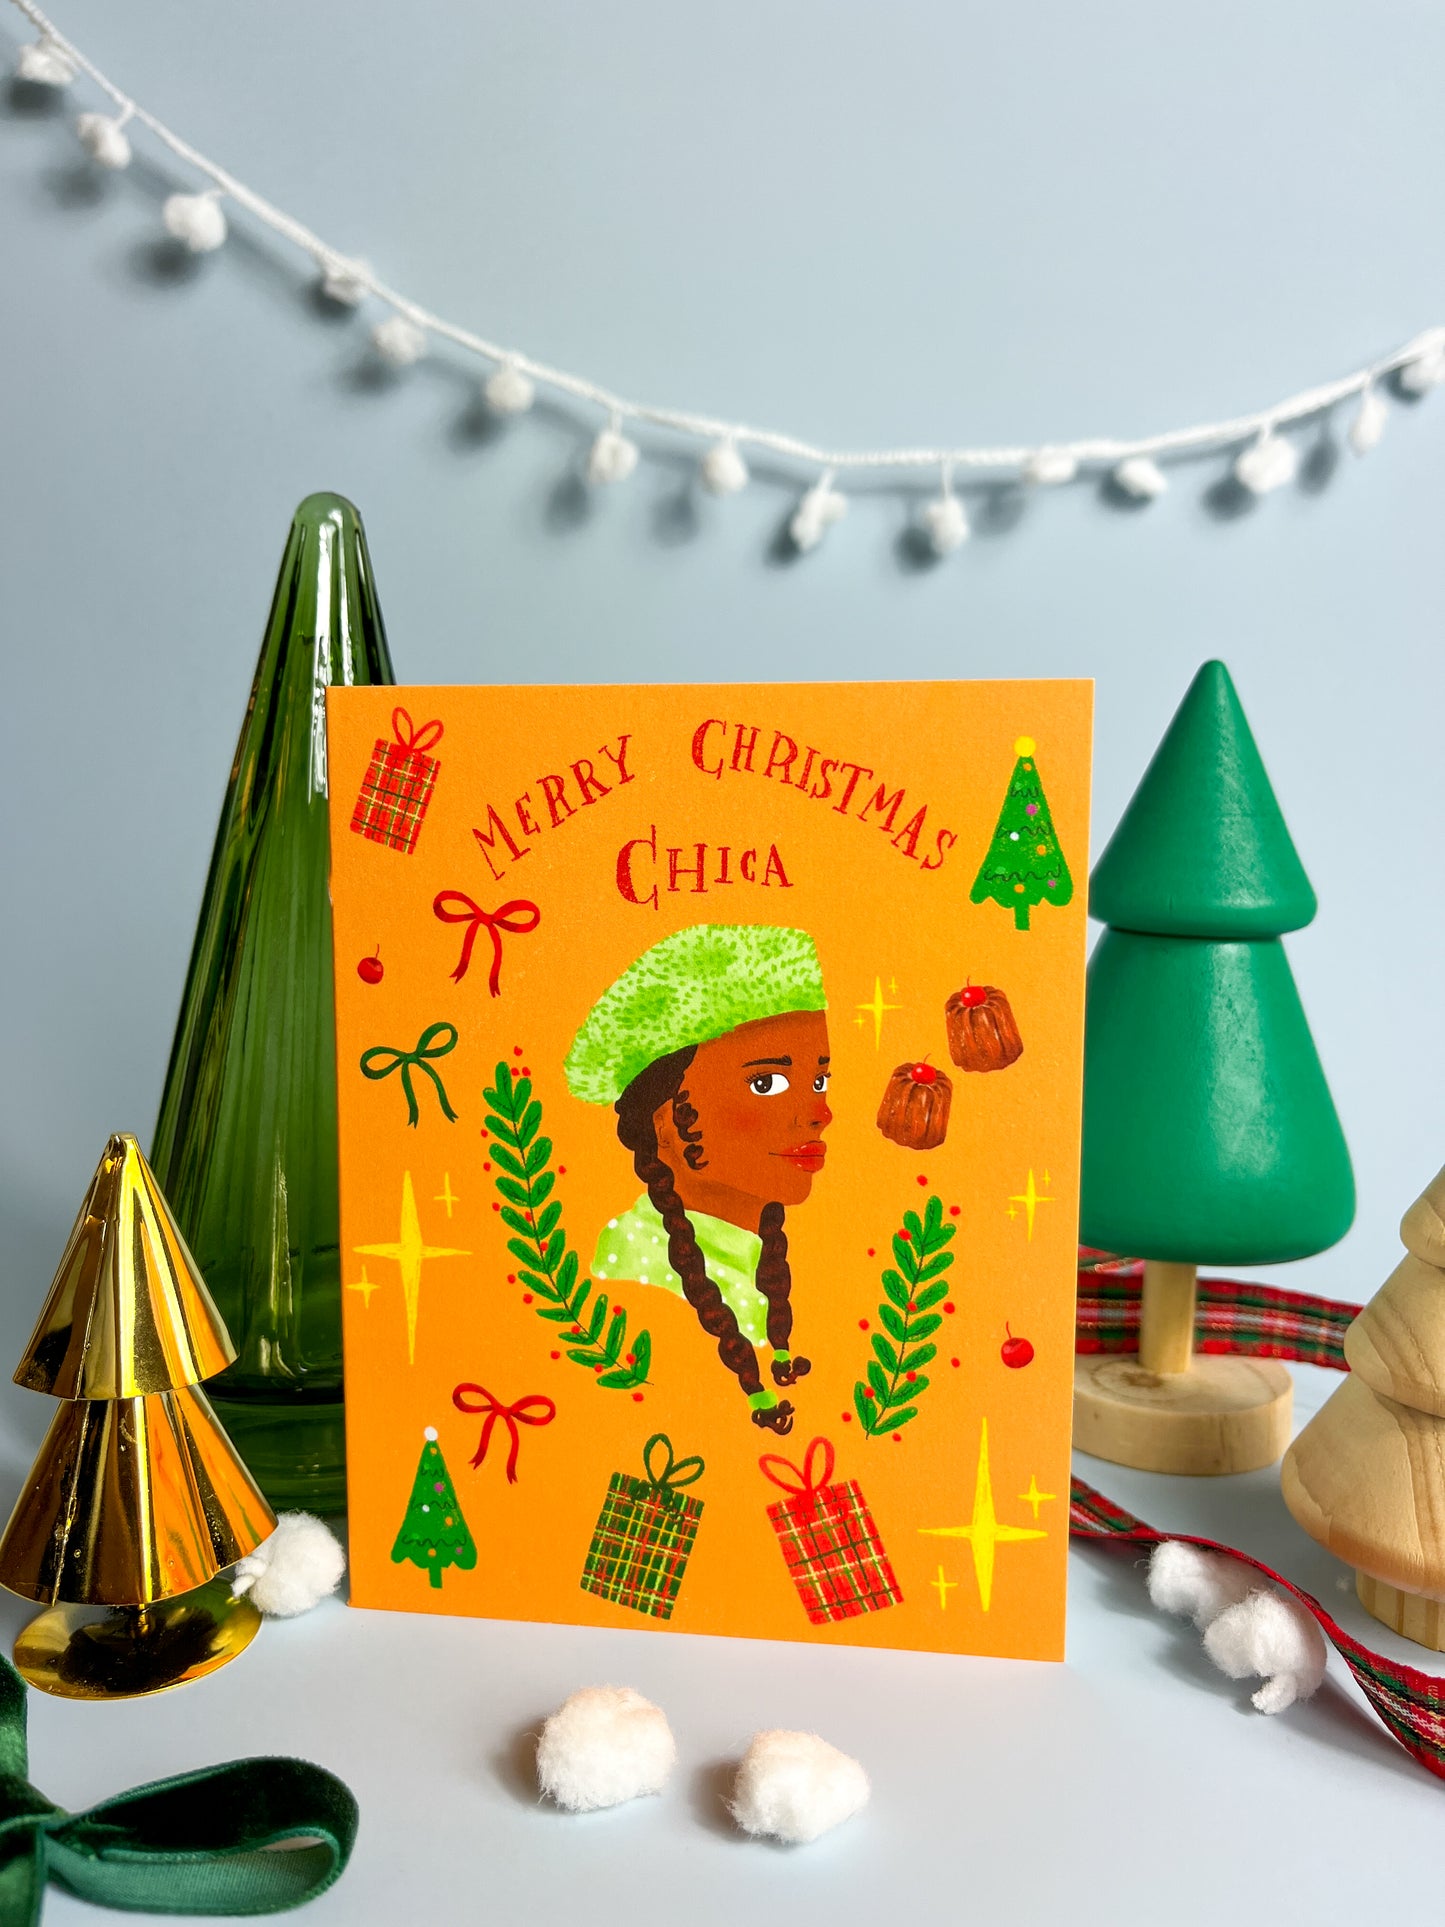 Merry Christmas Chica Greeting Card